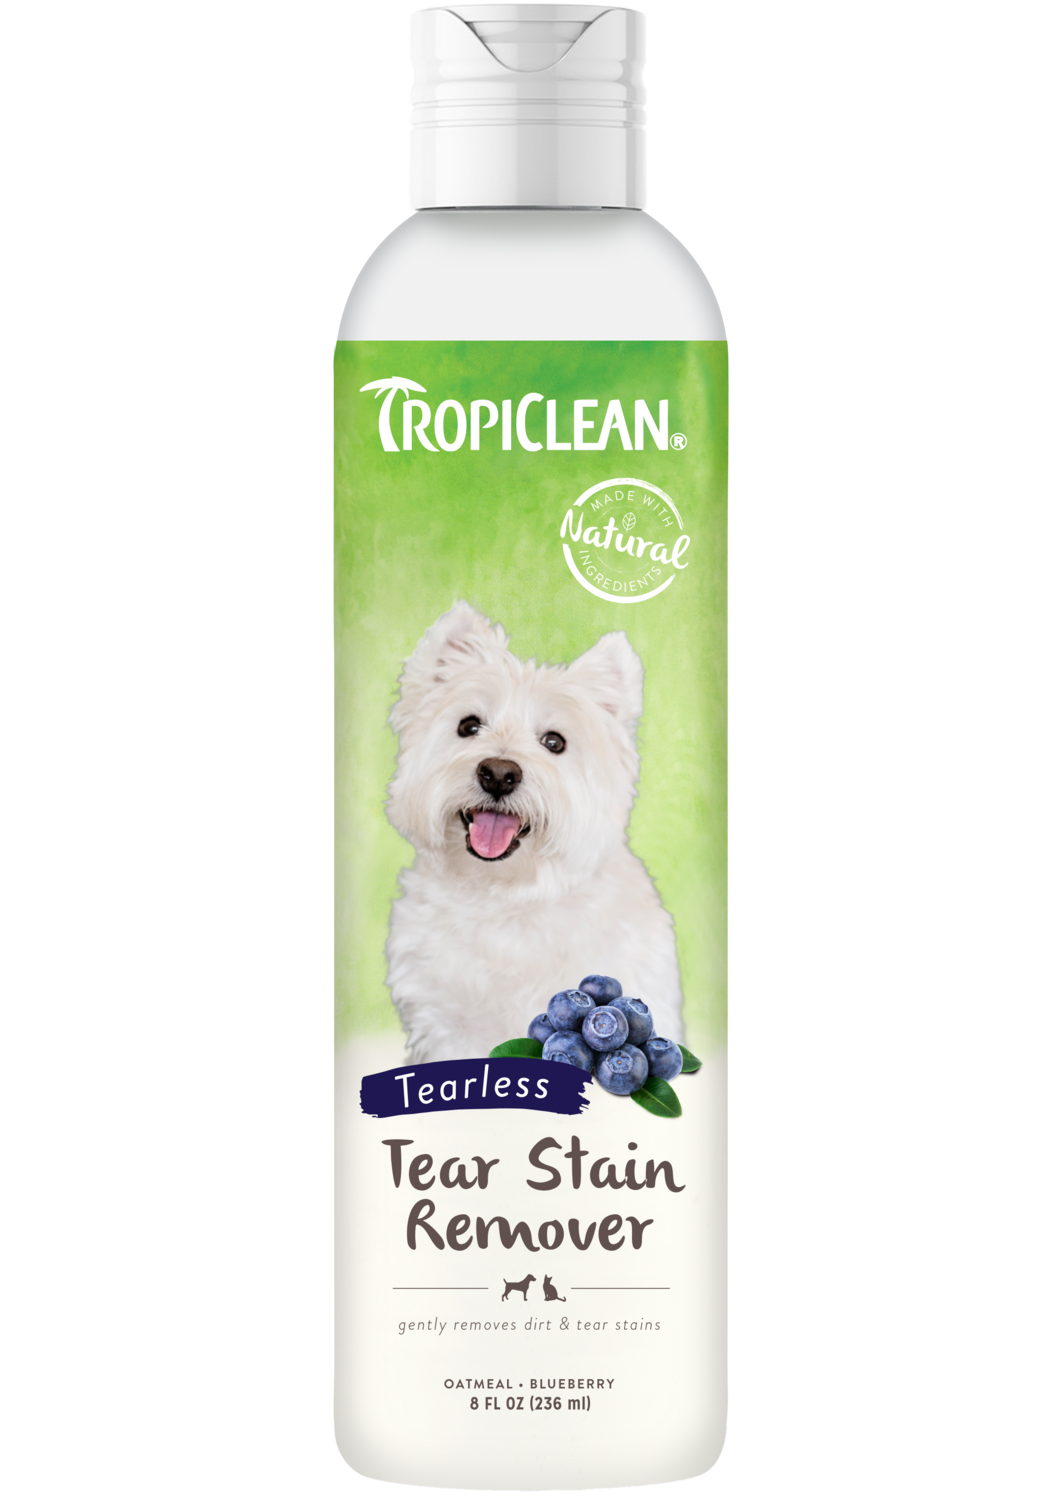 Tropiclean Tearless Pet Tear Stain Remover